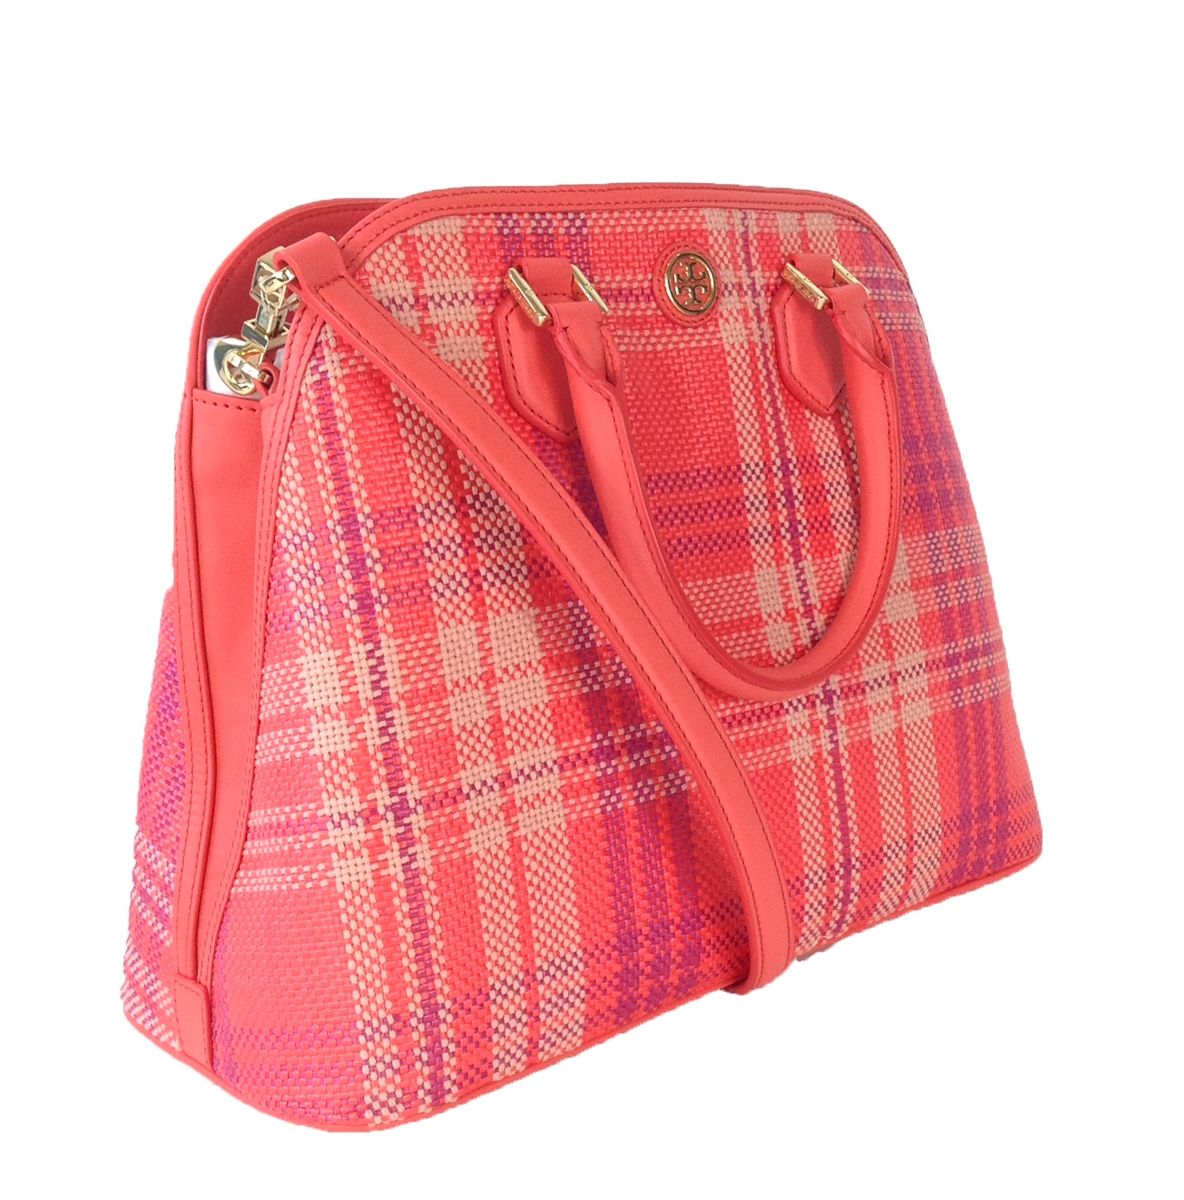 Tory Burch Robinson Plaid Large Open Dome Satchel, Poppy Coral/Carnation